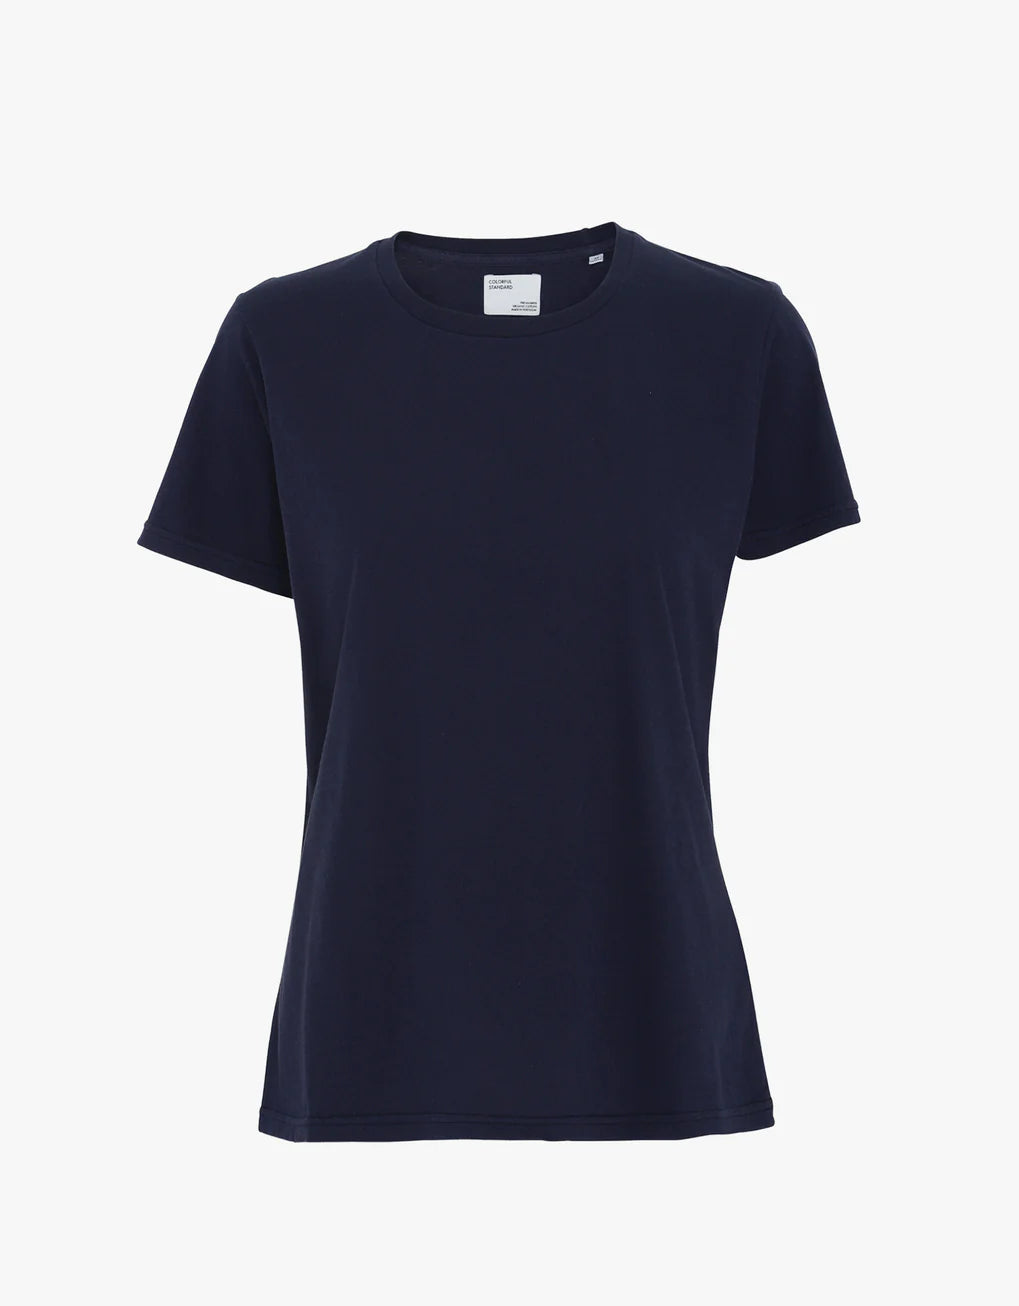 A machine washable women's Light Organic Tee from Colorful Standard.